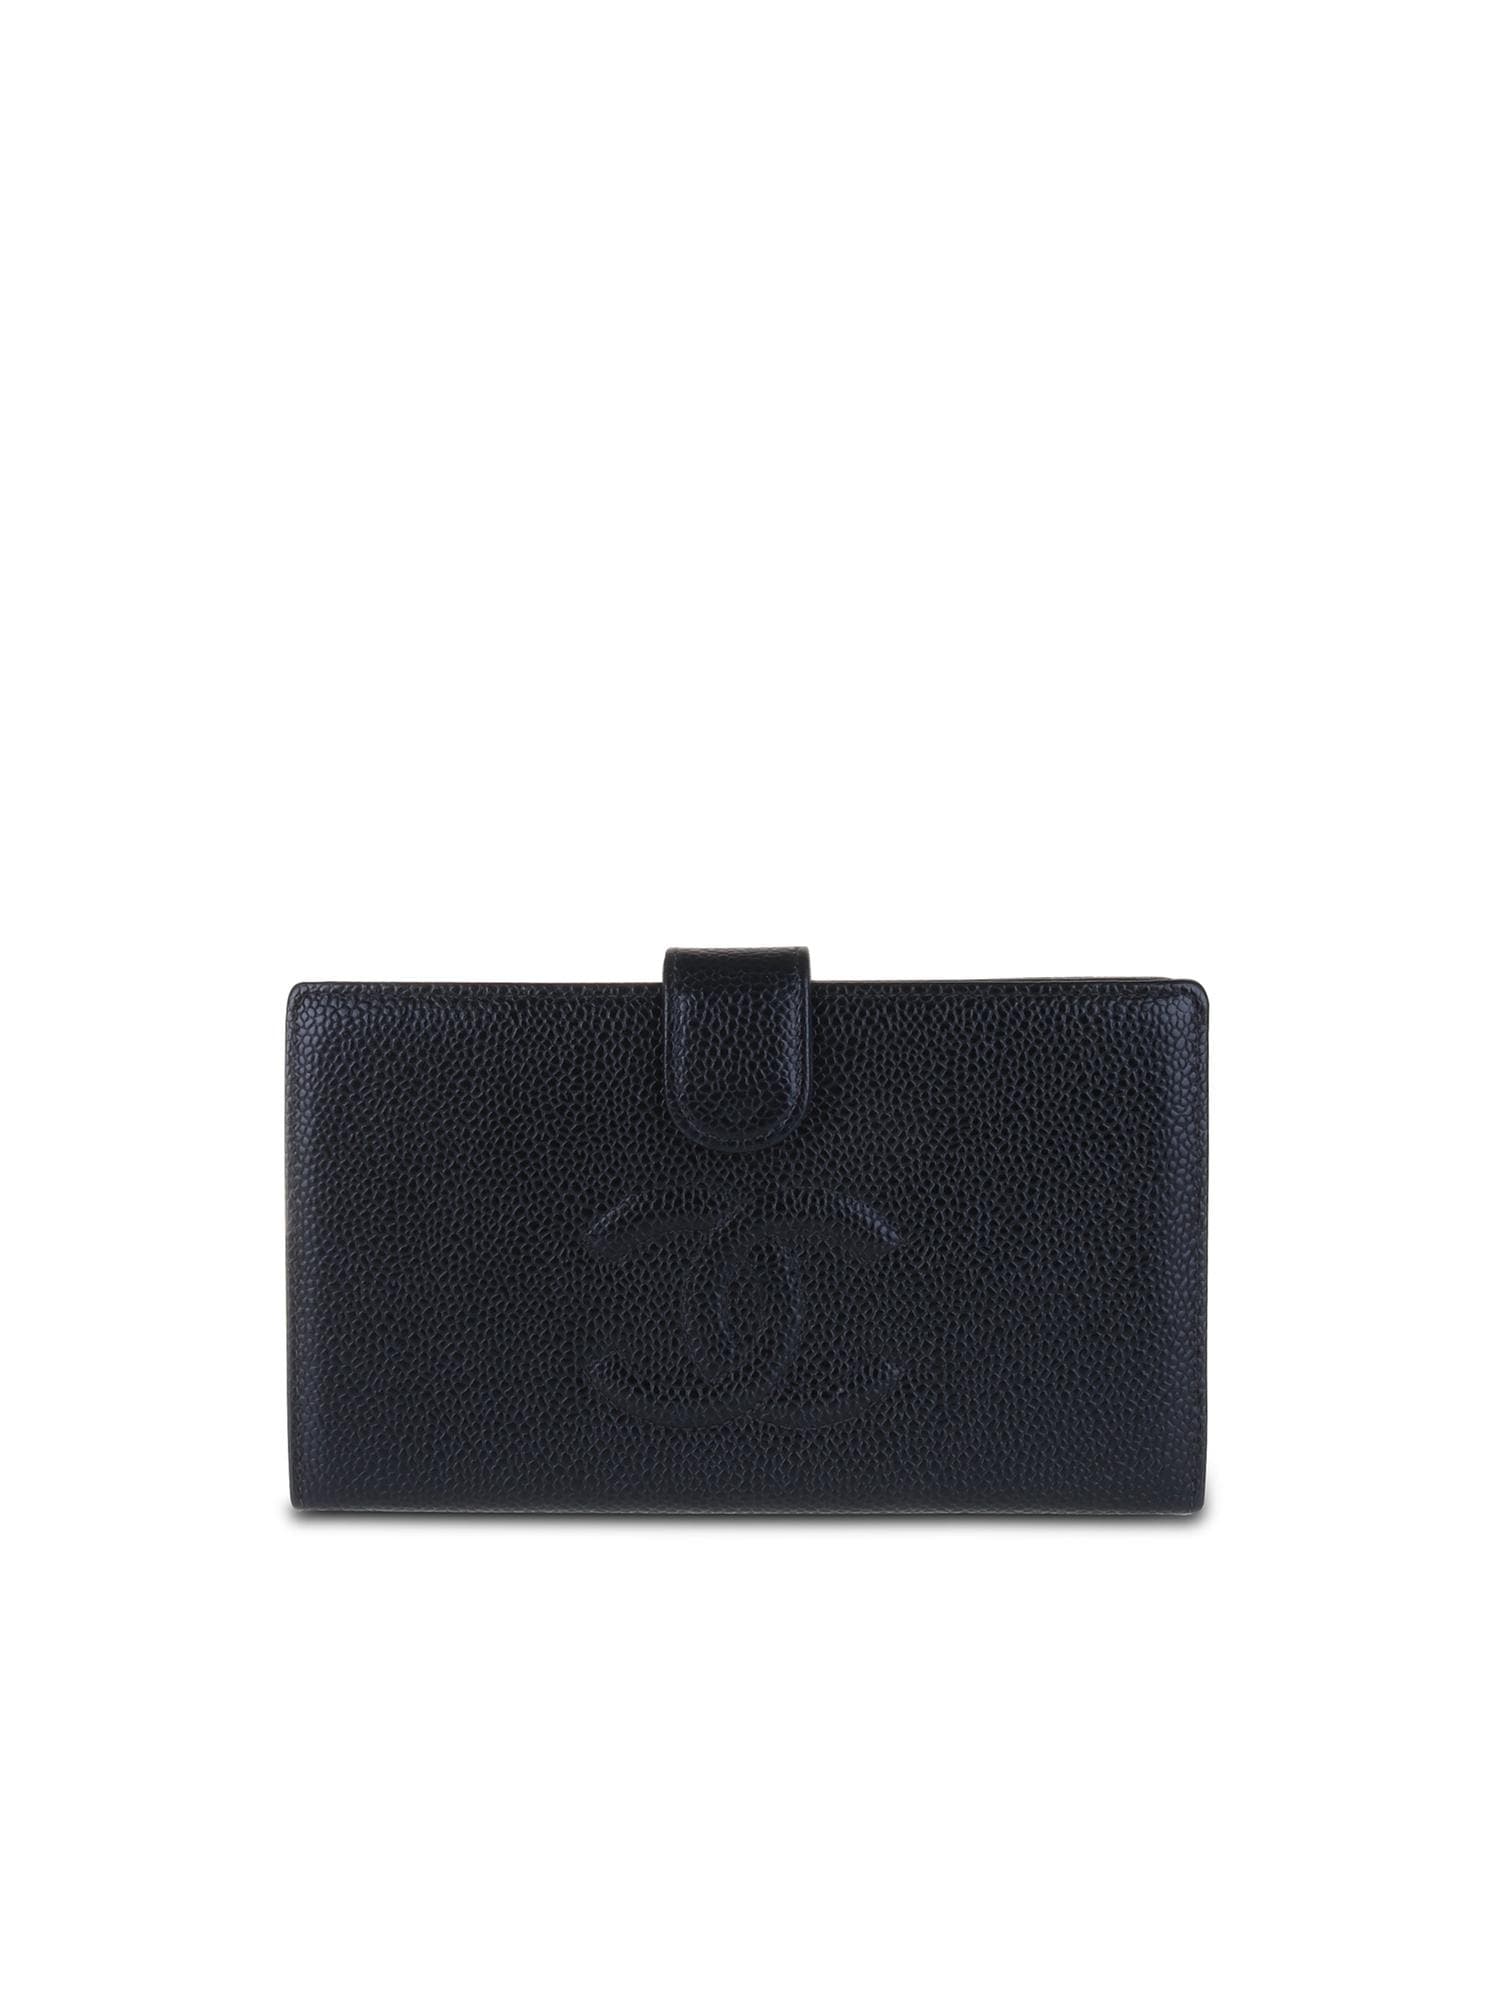 LUXE FINDS &#124 Chanel Black Caviar Long Wallet